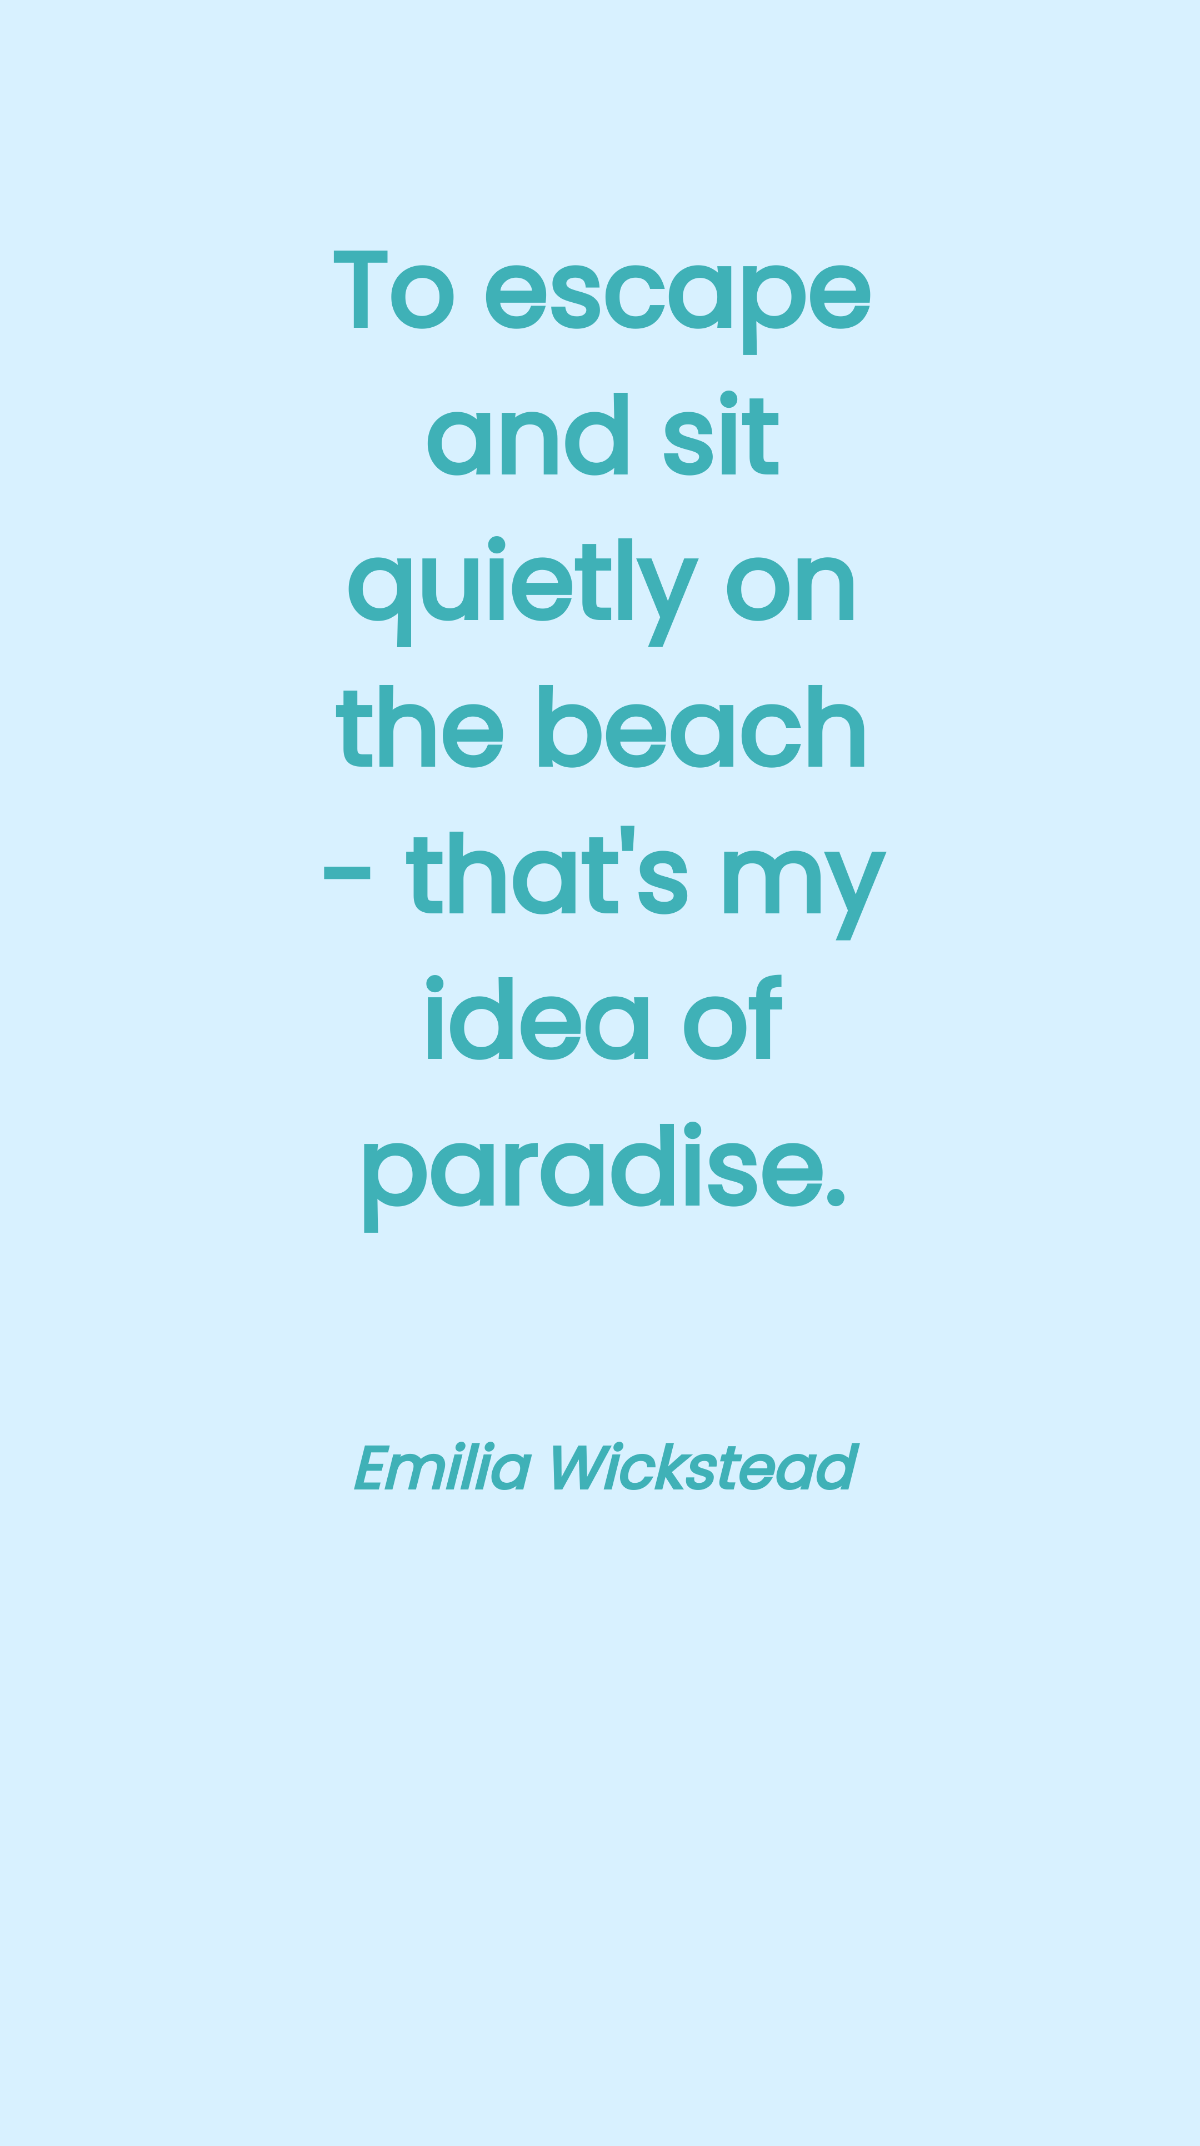 Free Emilia Wickstead - To escape and sit quietly on the beach - that's my idea of paradise. Template